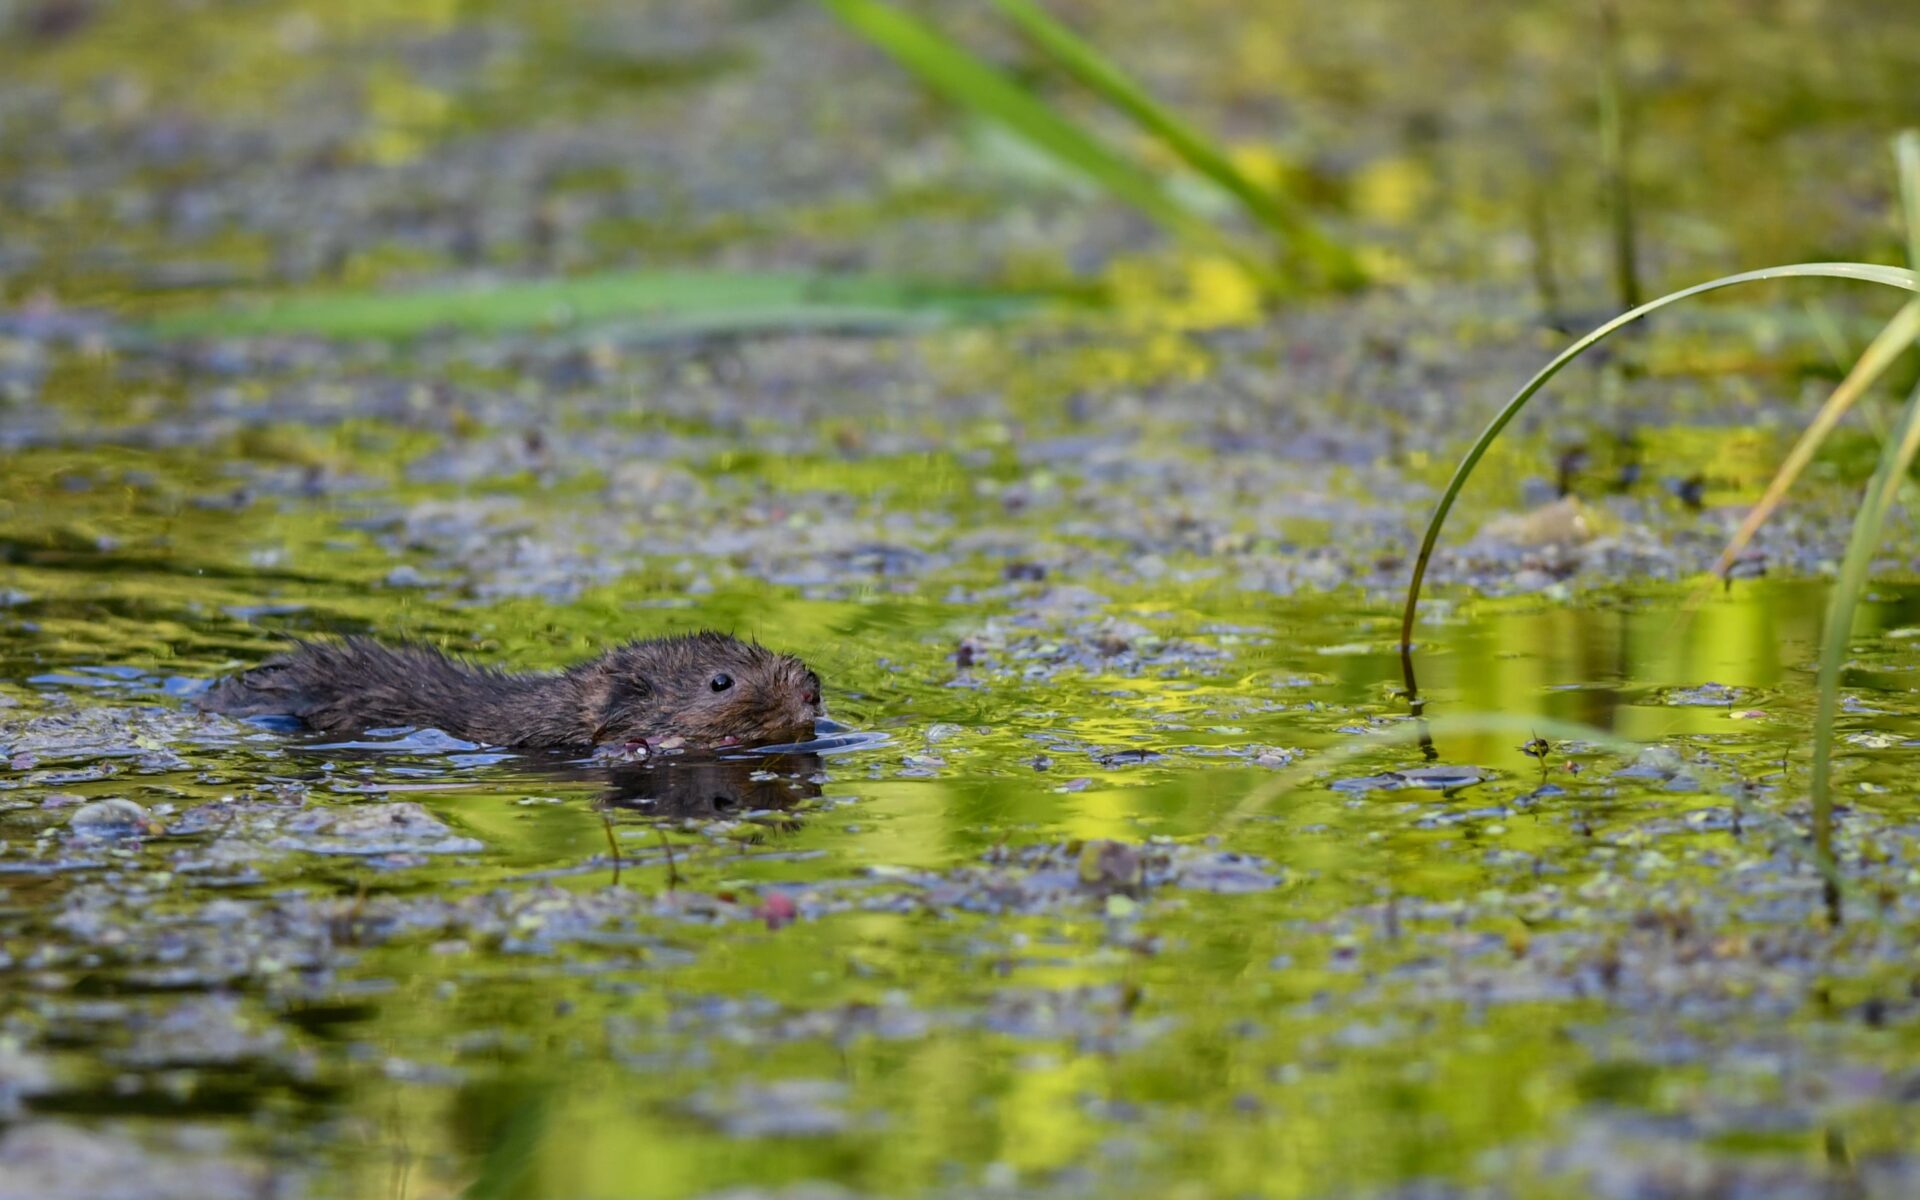 Michael Rodgers – Water Vole